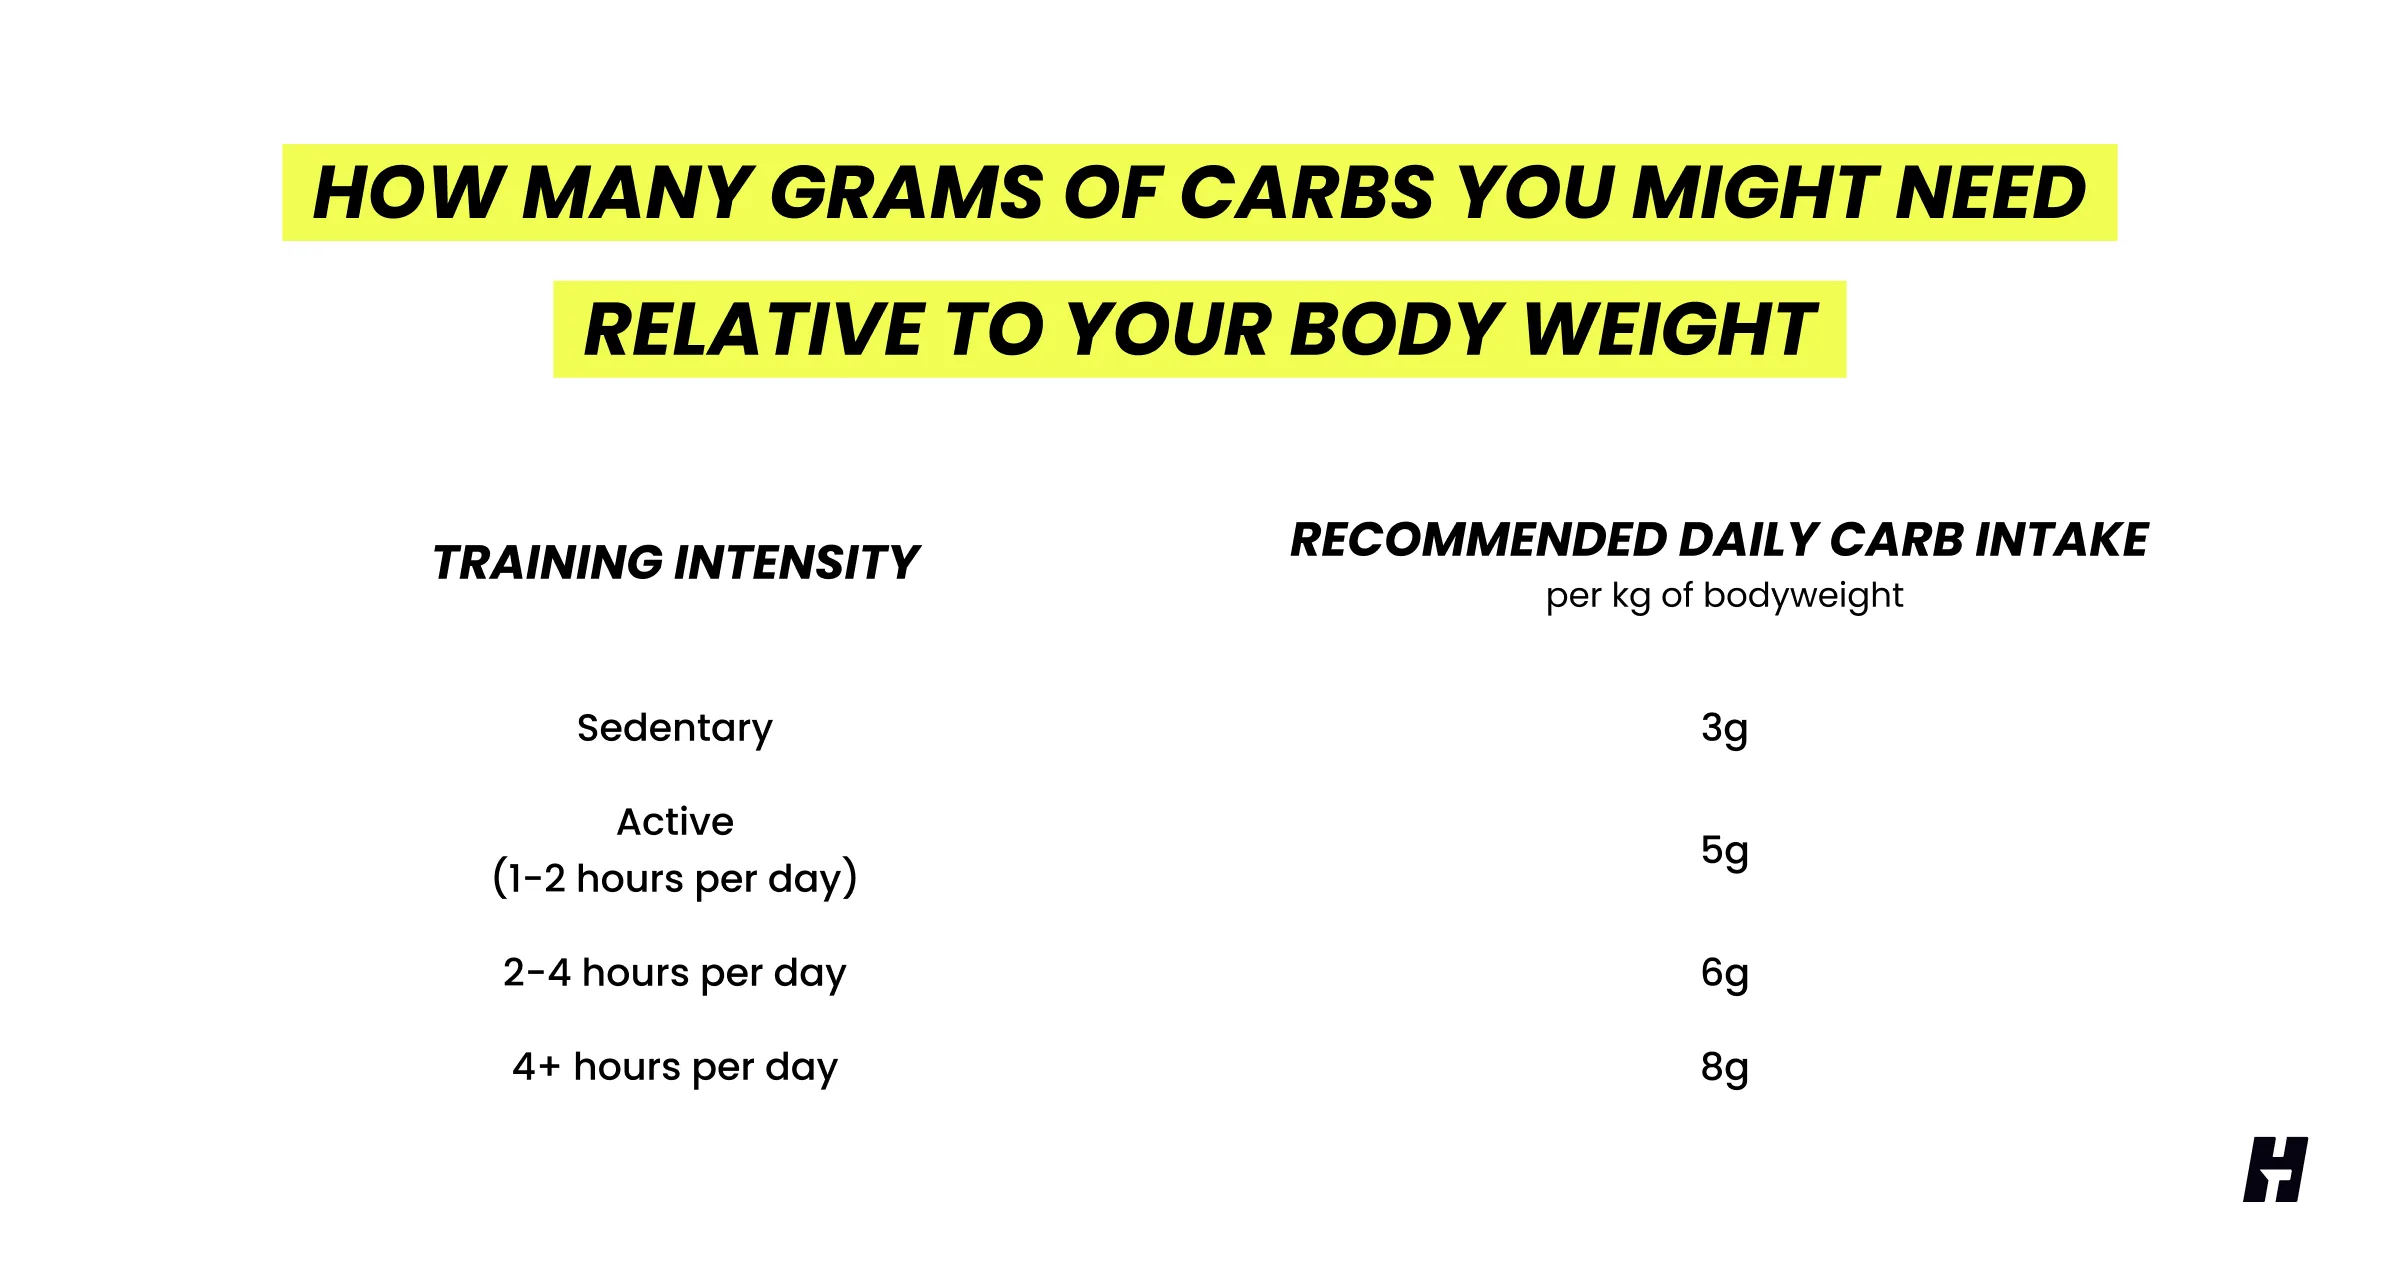 How many grams of carbs you might need relative to your body weight